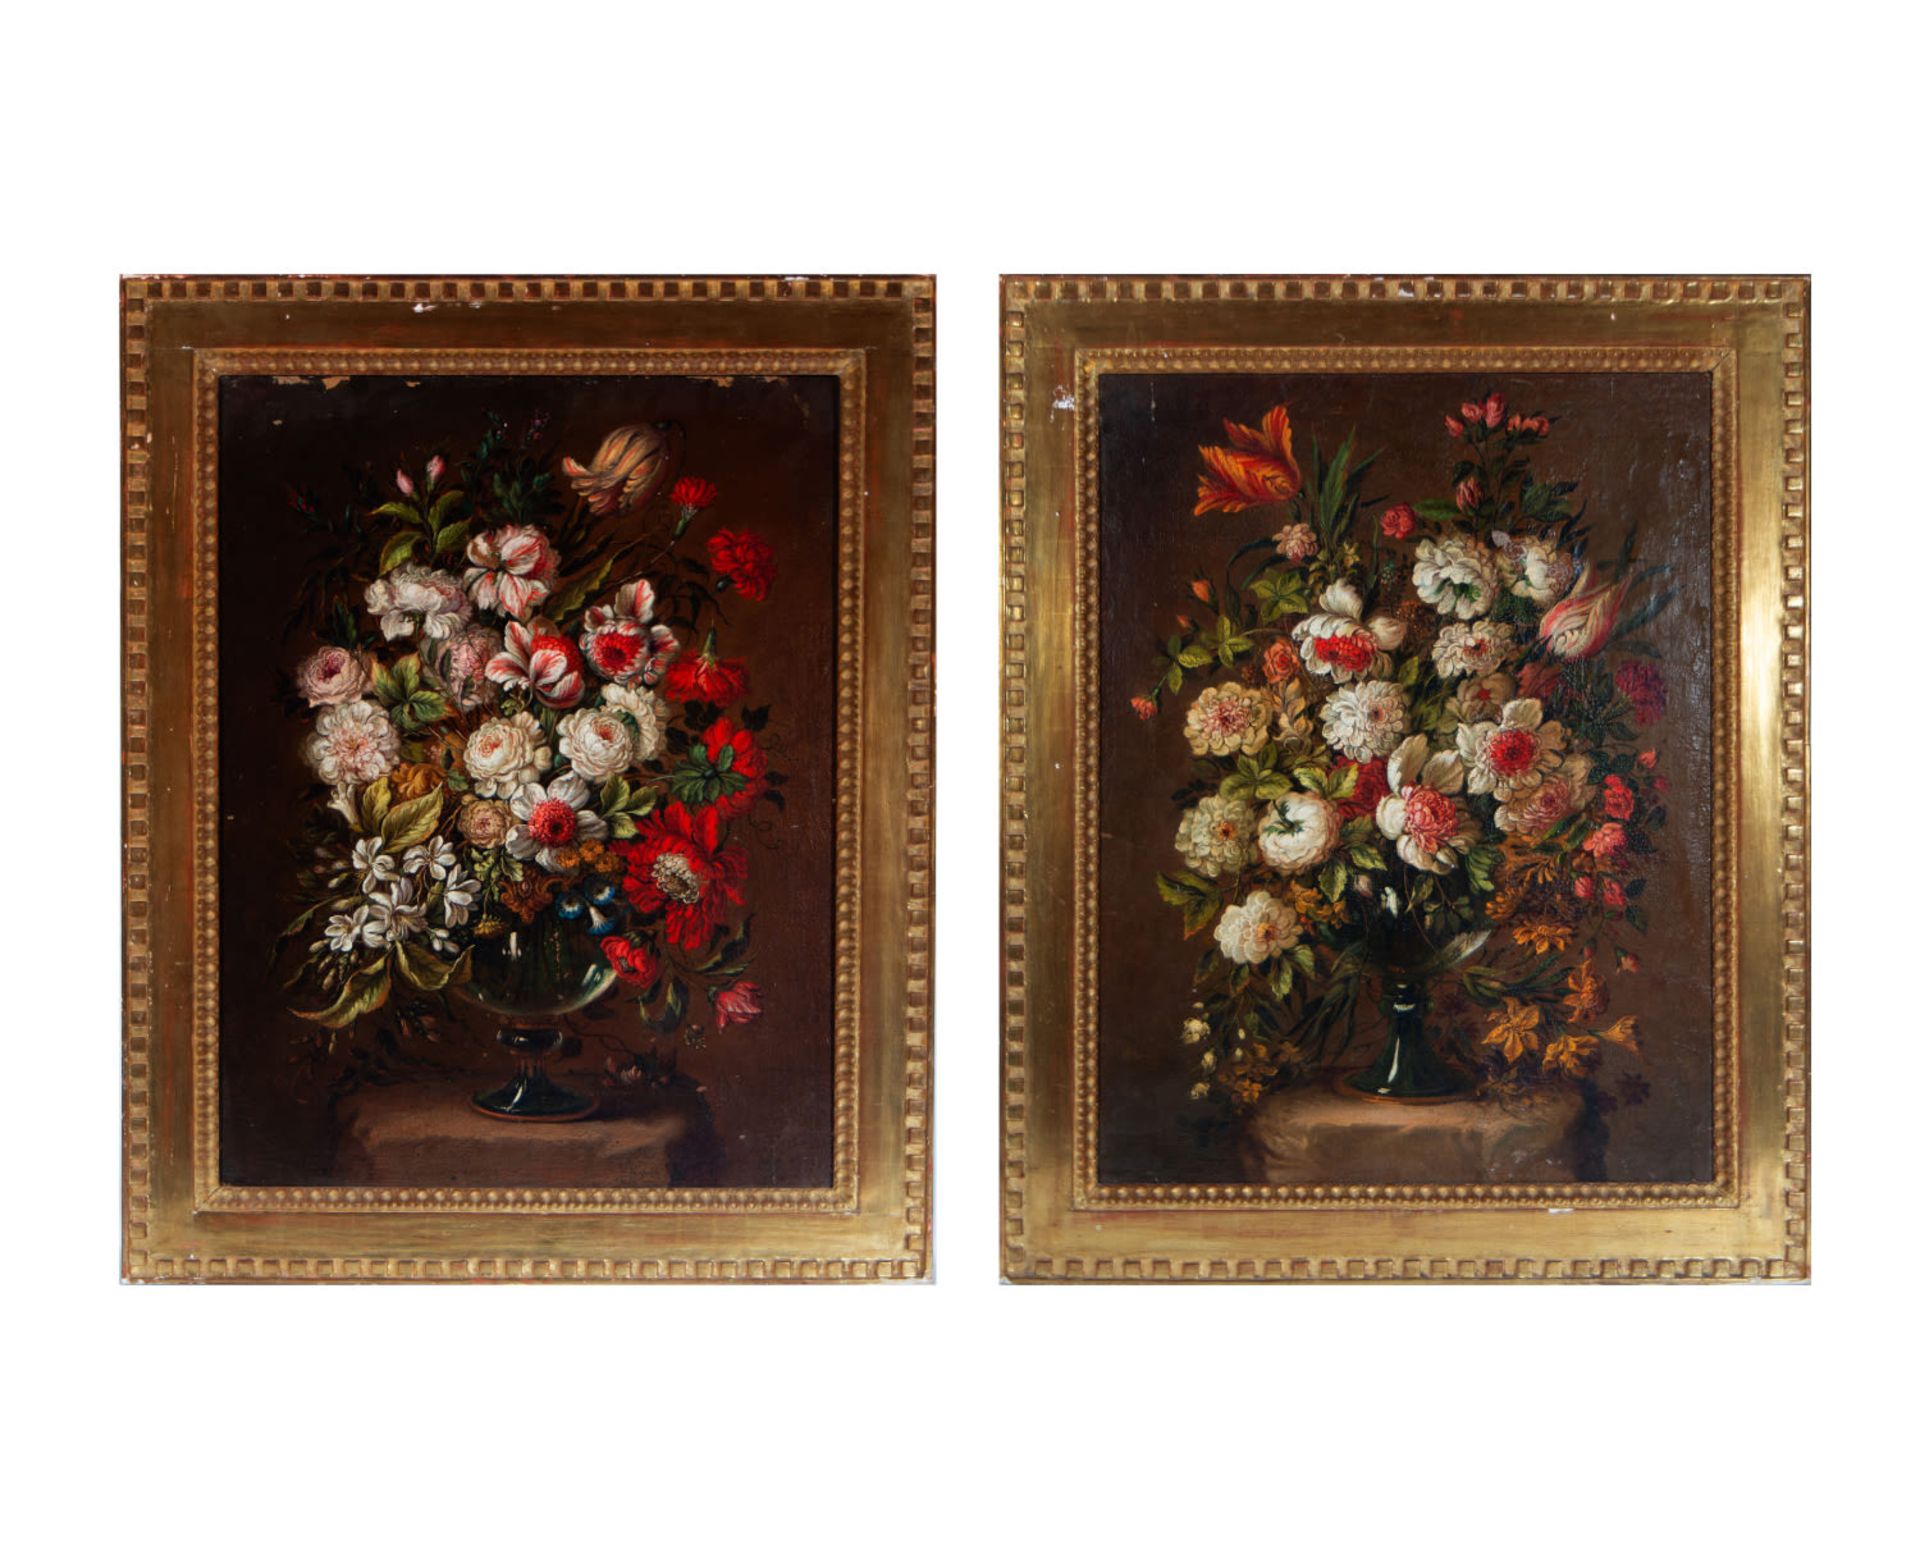 Pair of large still lifes of Flowers, Dutch school of the 17th - 18th century